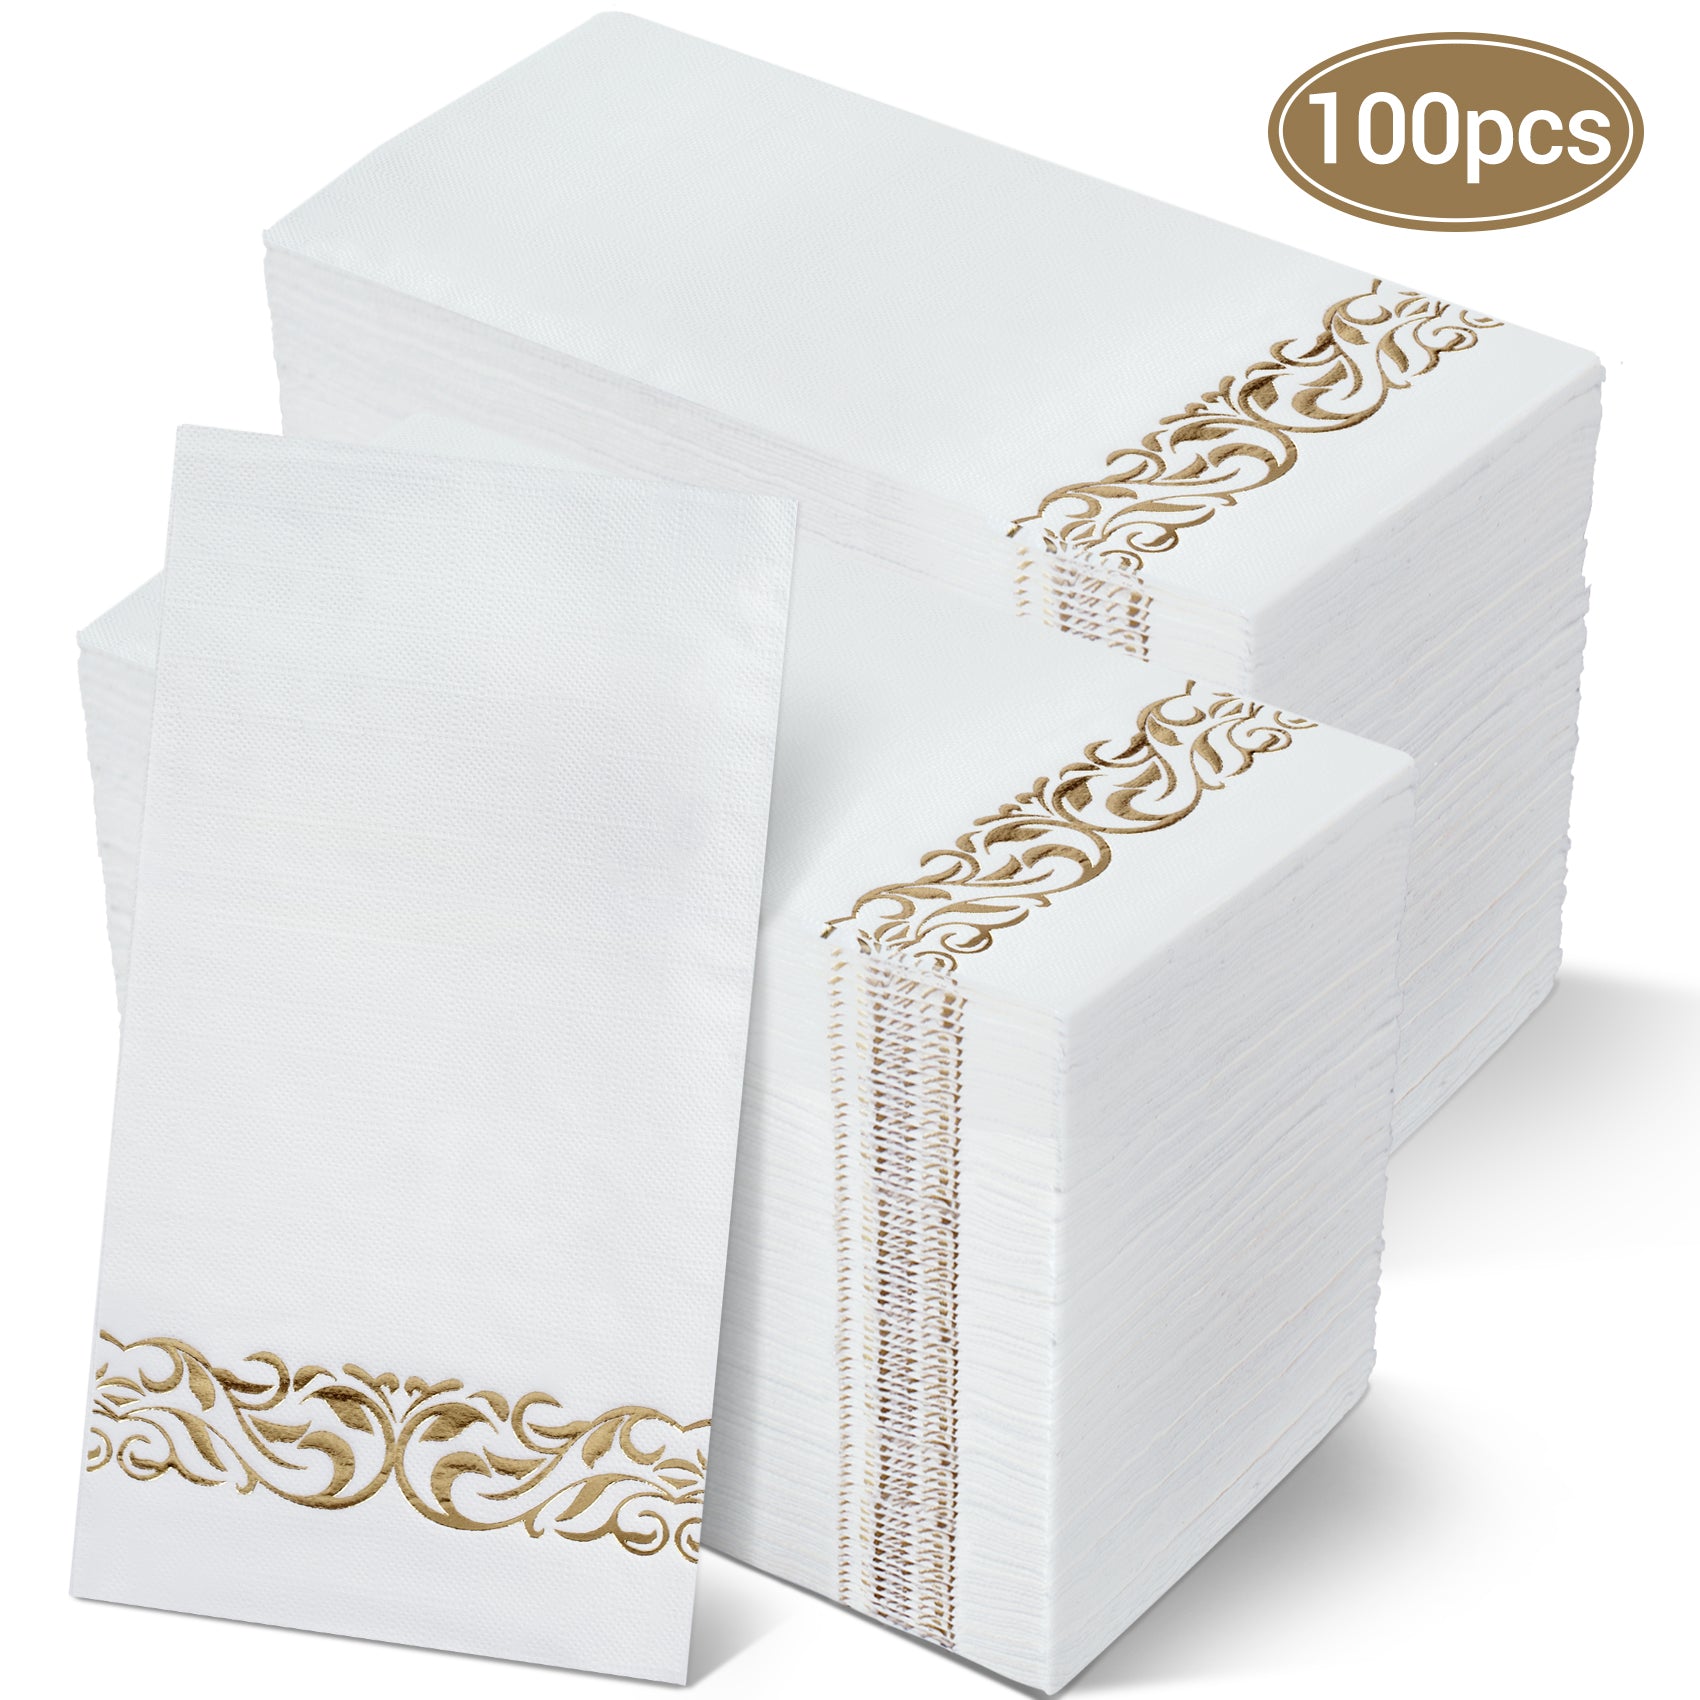  100 Christmas Guest Napkins 3 Ply Disposable Paper Holiday Guest  Towels Featuring Merry and Bright in Gold Foil with Christmas Trees in Red,  Green and Gold : Health & Household